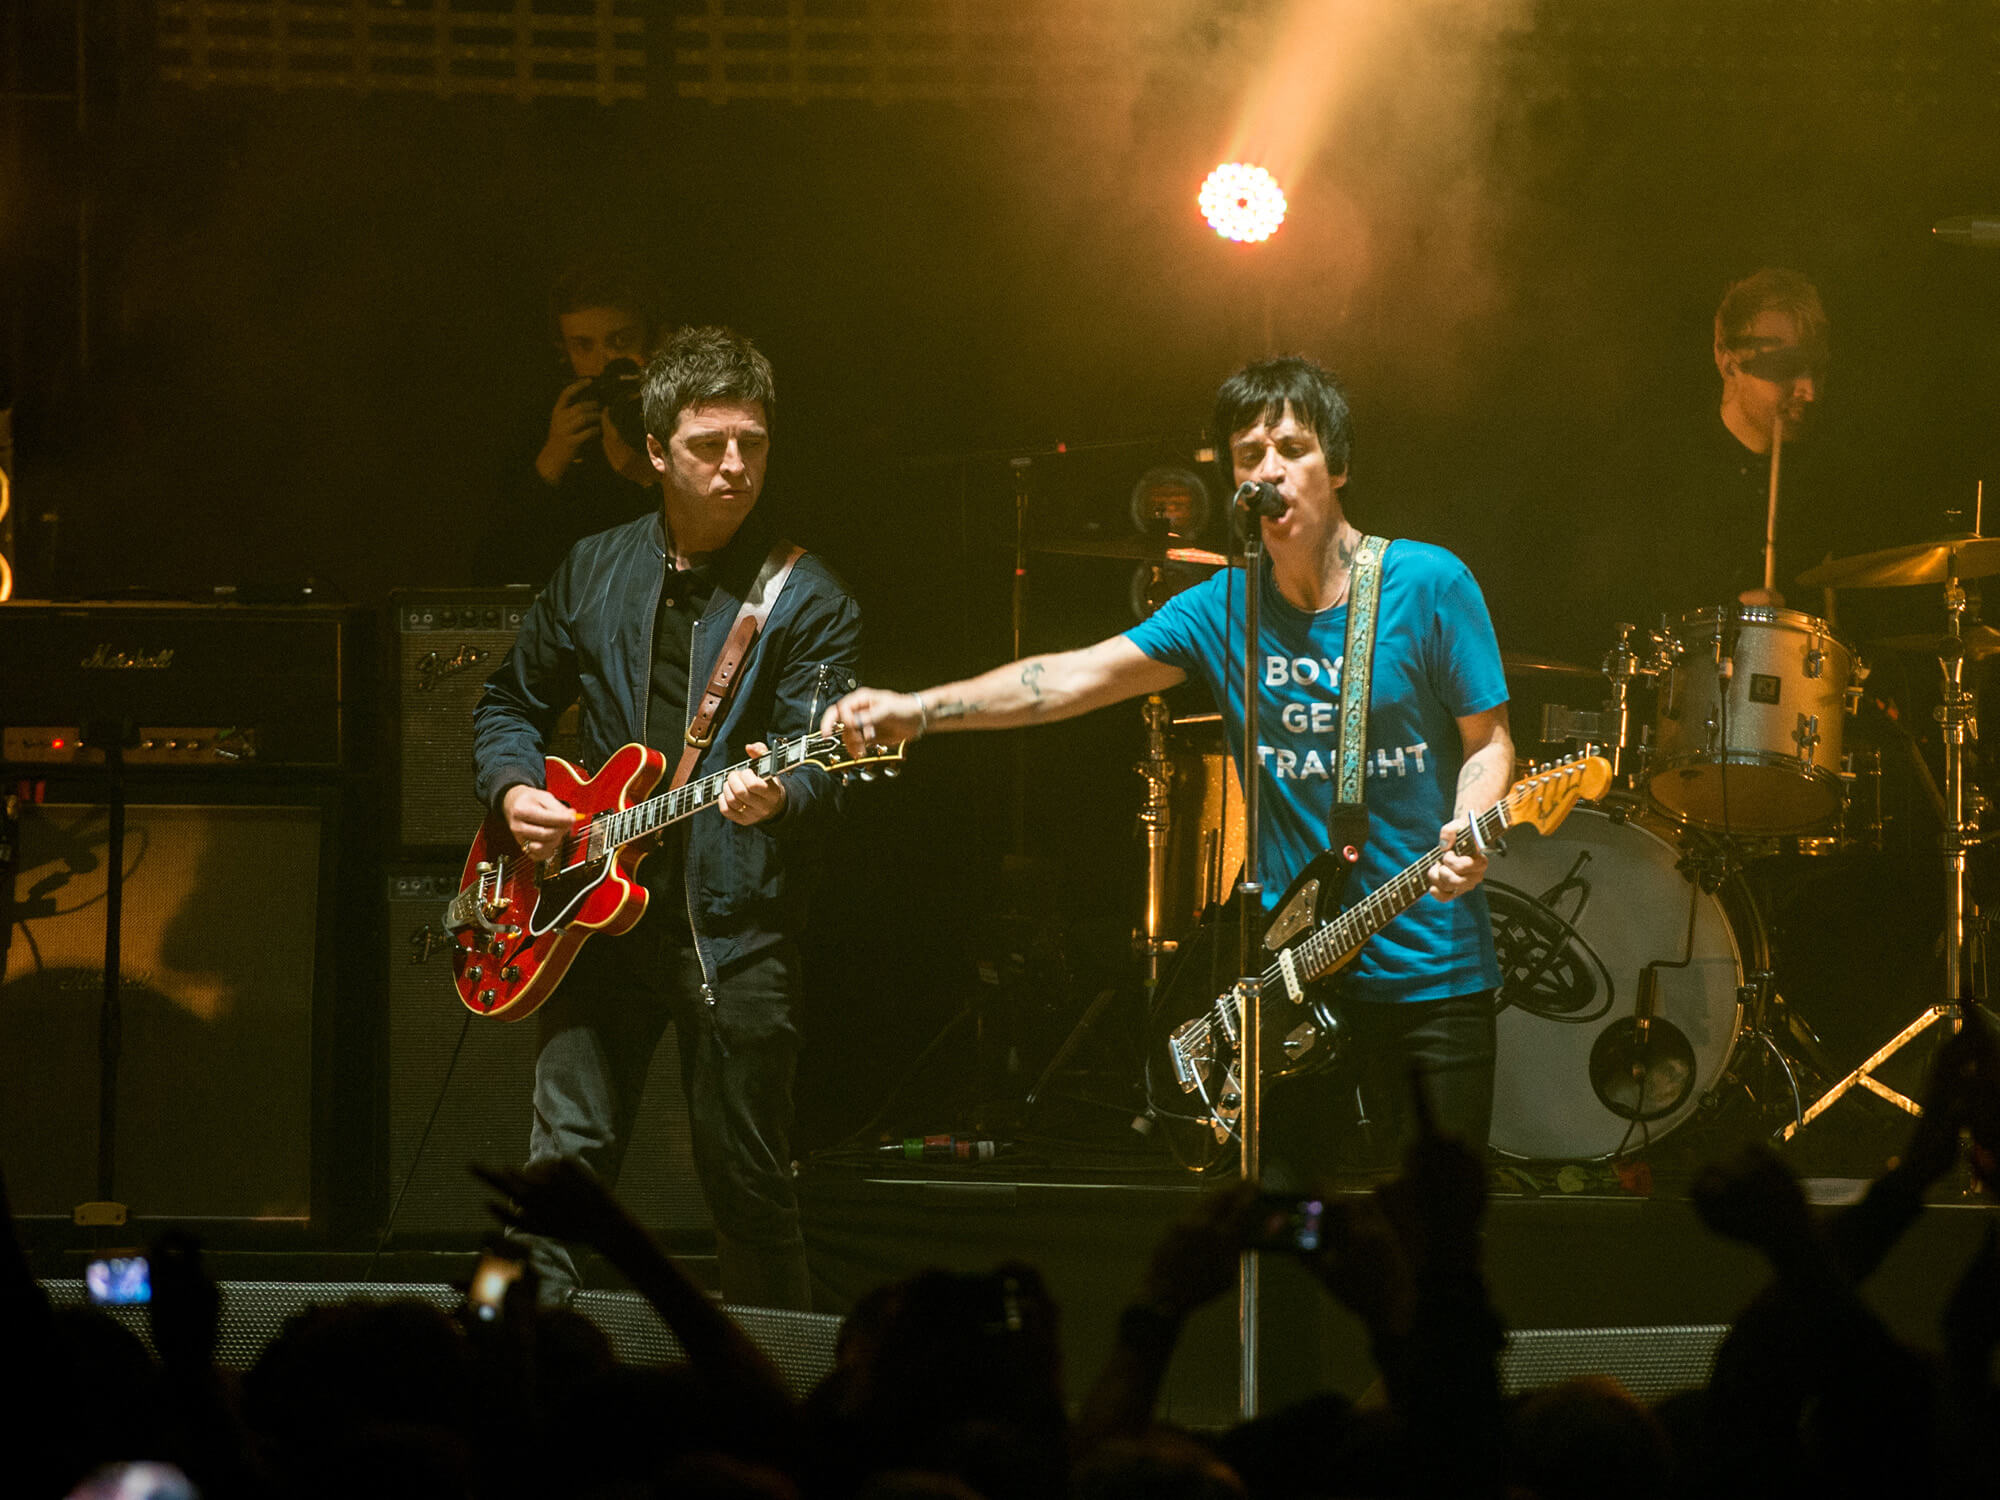 Noel Gallagher and Johnny Marr on stage together in 2014, both with guitars in hand. Marr is singing into a mic and is pointing outwards with his right arm.